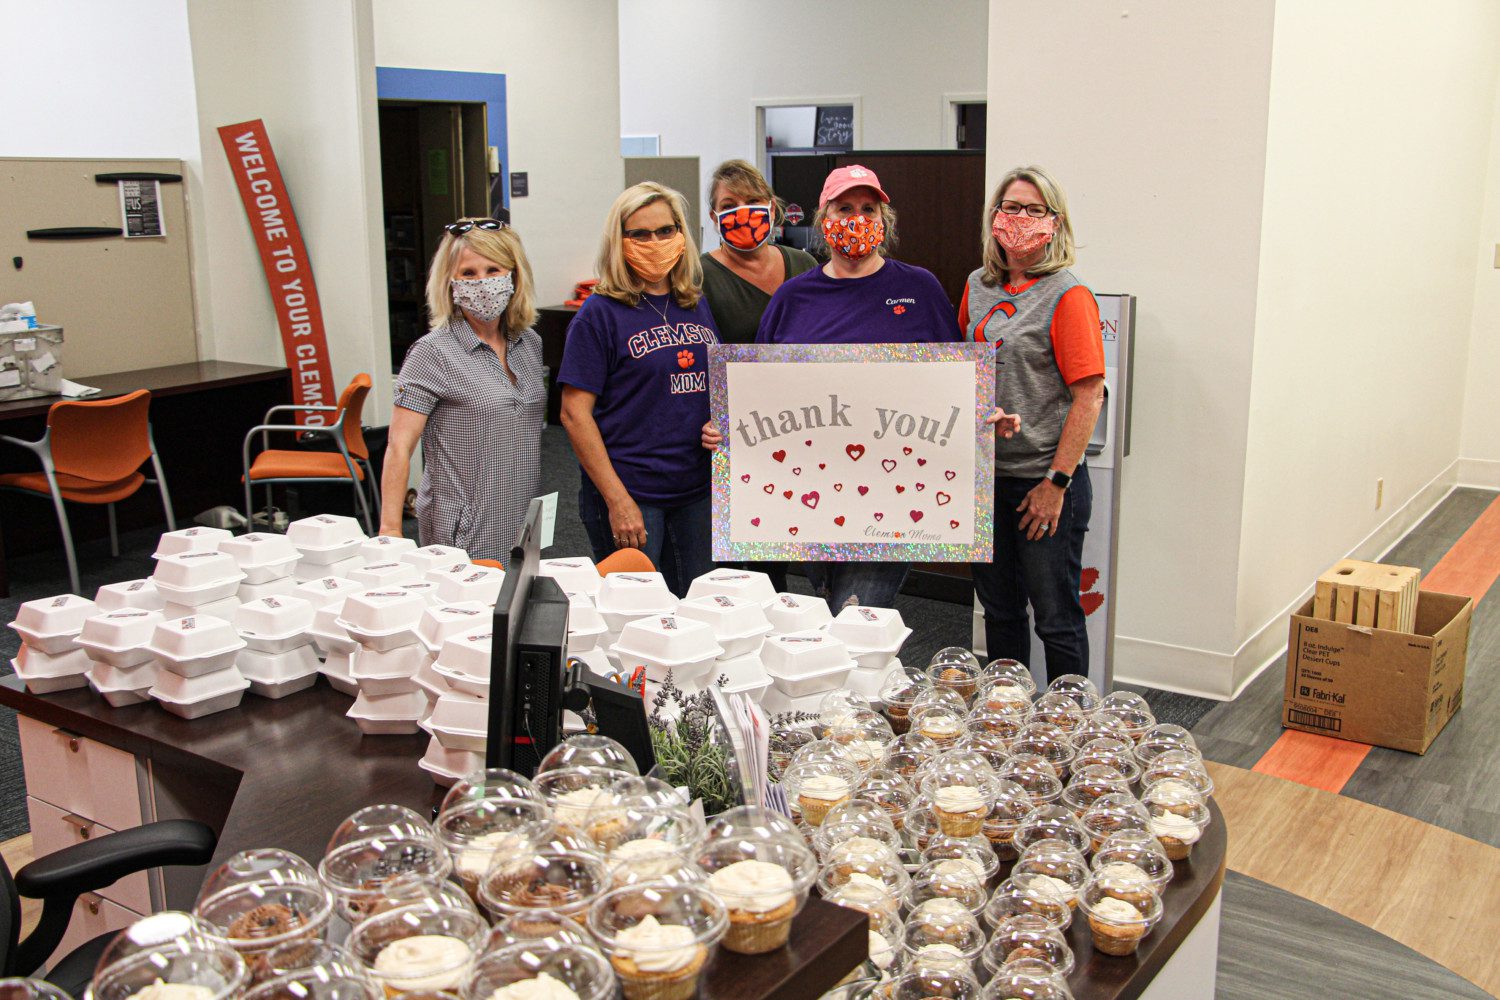 A group of Clemson moms delivered an assortment of sweet treats Monday, June 1 to housing staff in Mell Hall. Pictured, left to right, are Michelle Peterson, Amy Twitty, Kim Merritt, Carmen Burgess and Shelley Mahan.